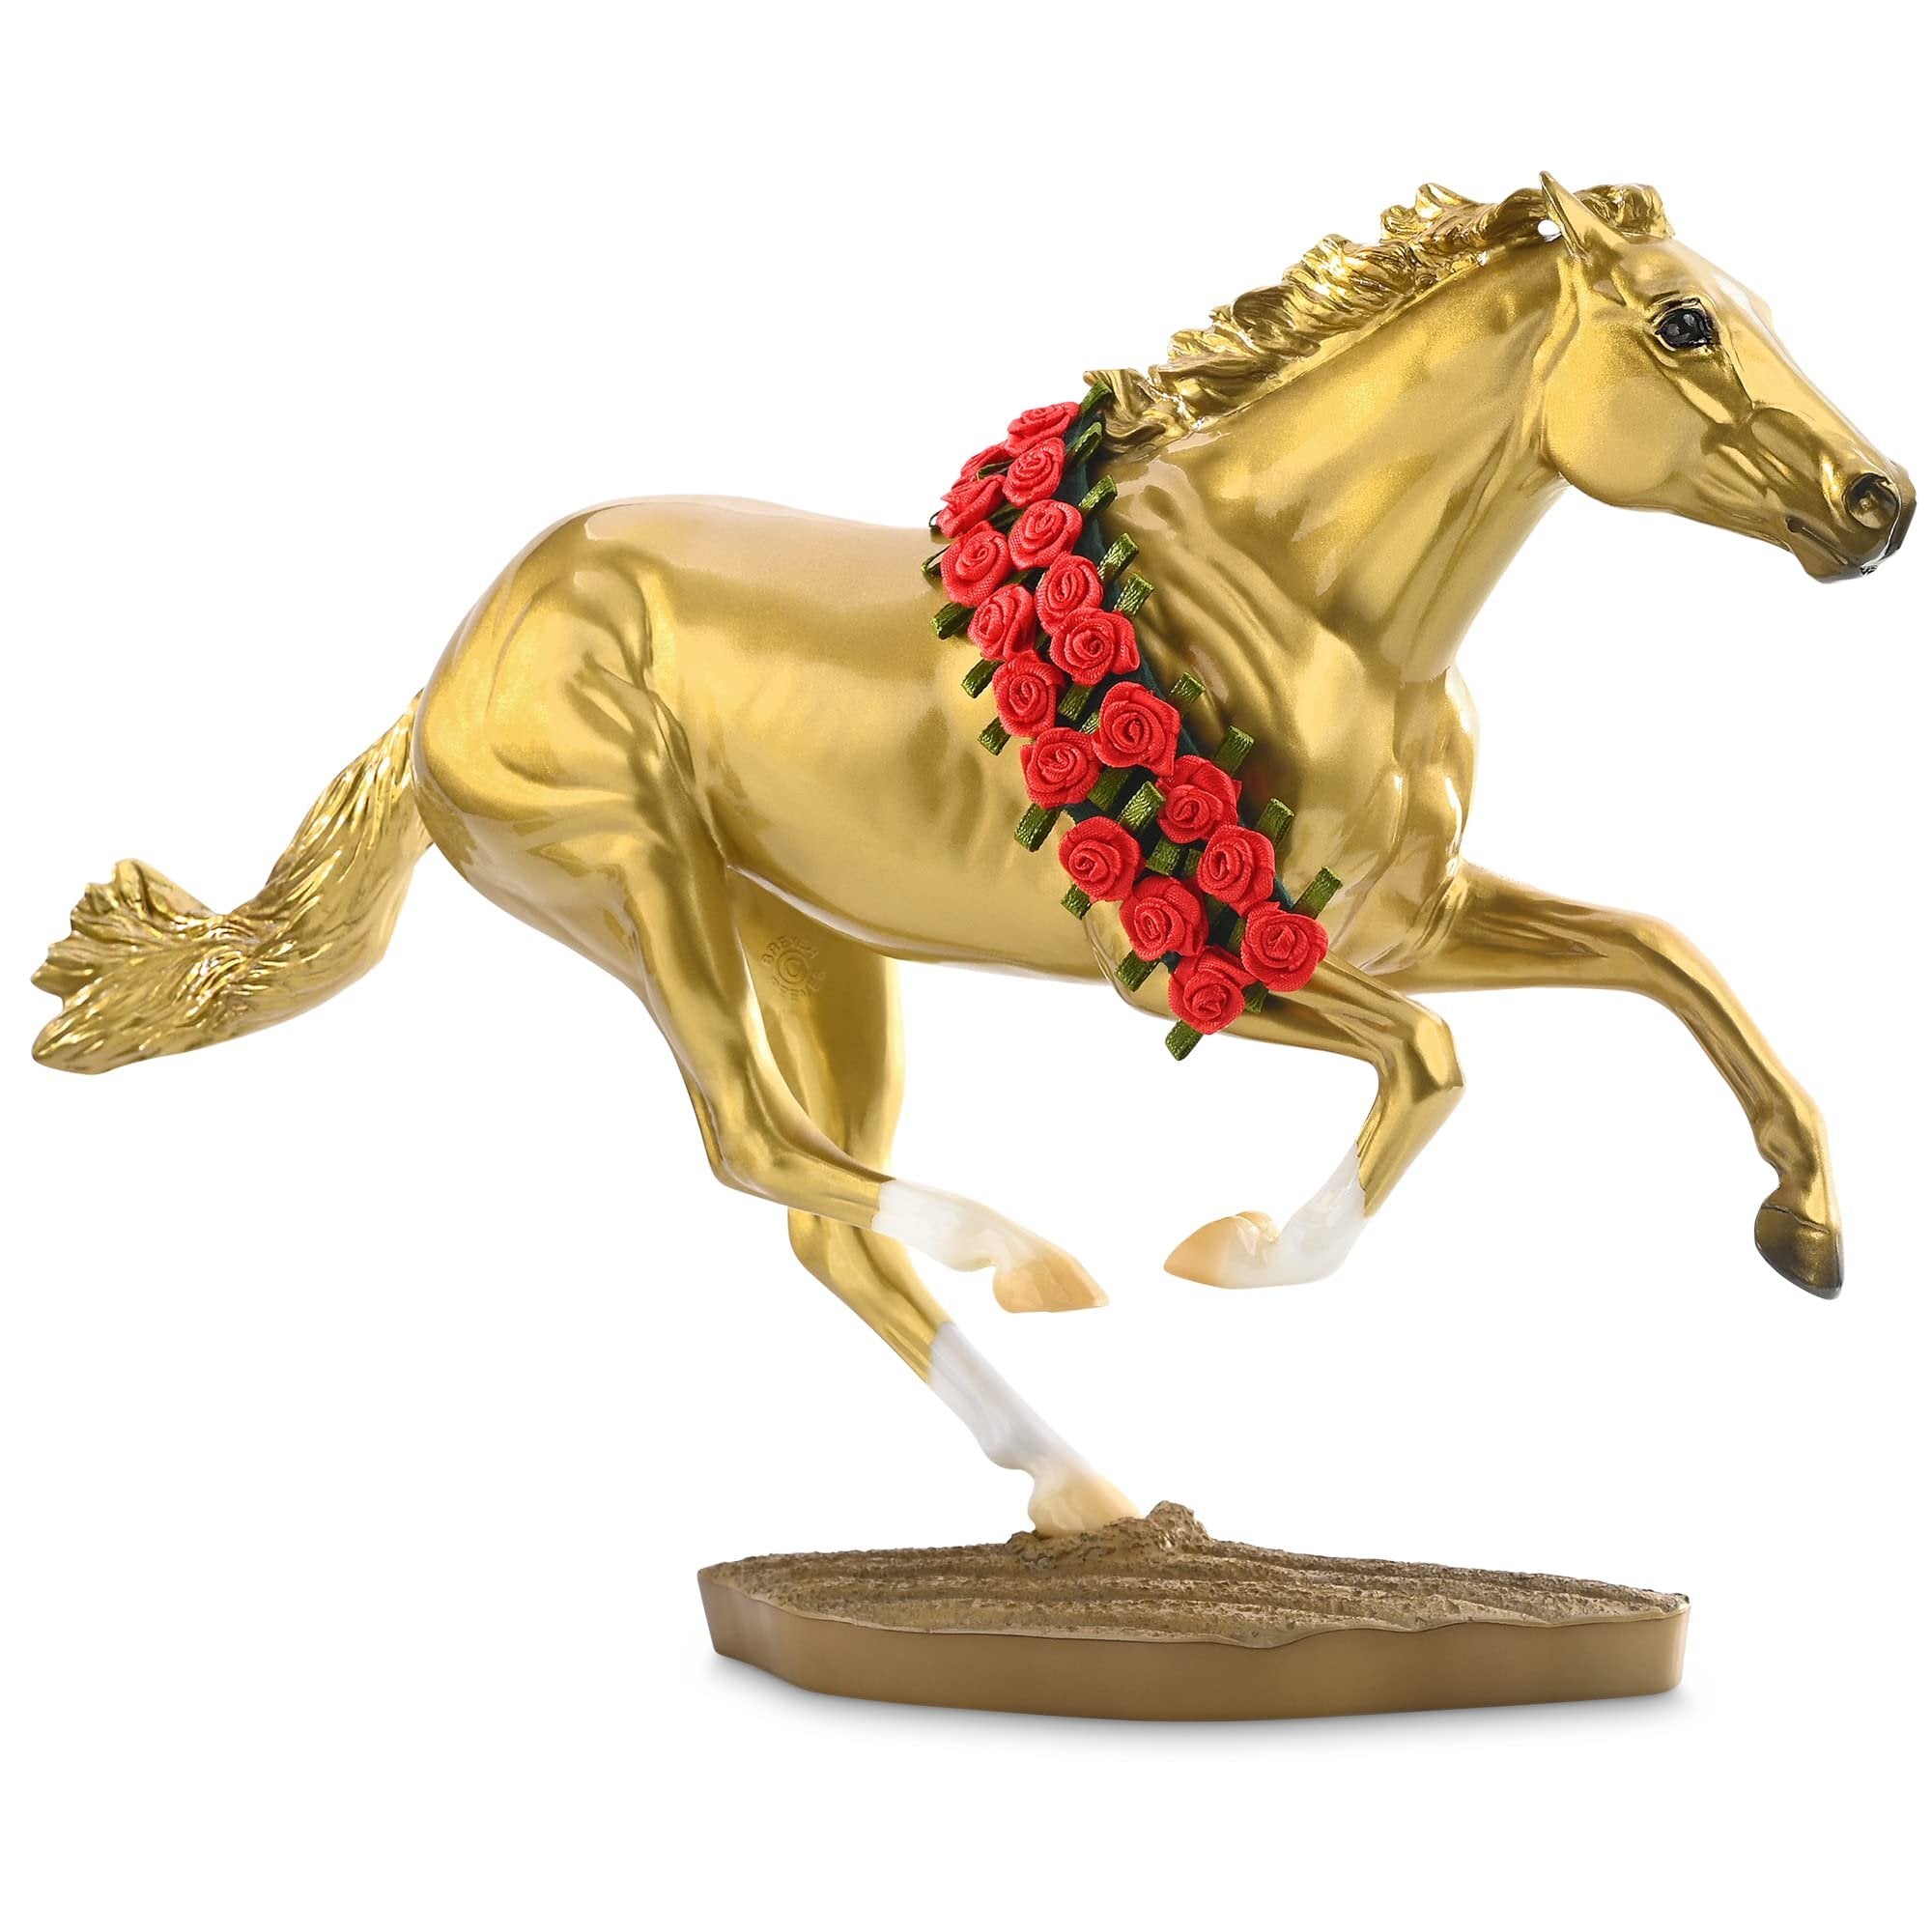 Breyer Horses Traditional Series - Secretariat 50th Anniversary Model | Limited Edition | Horse Toy Model | 14.25" x 9" | 1:9 Scale | Model #1874